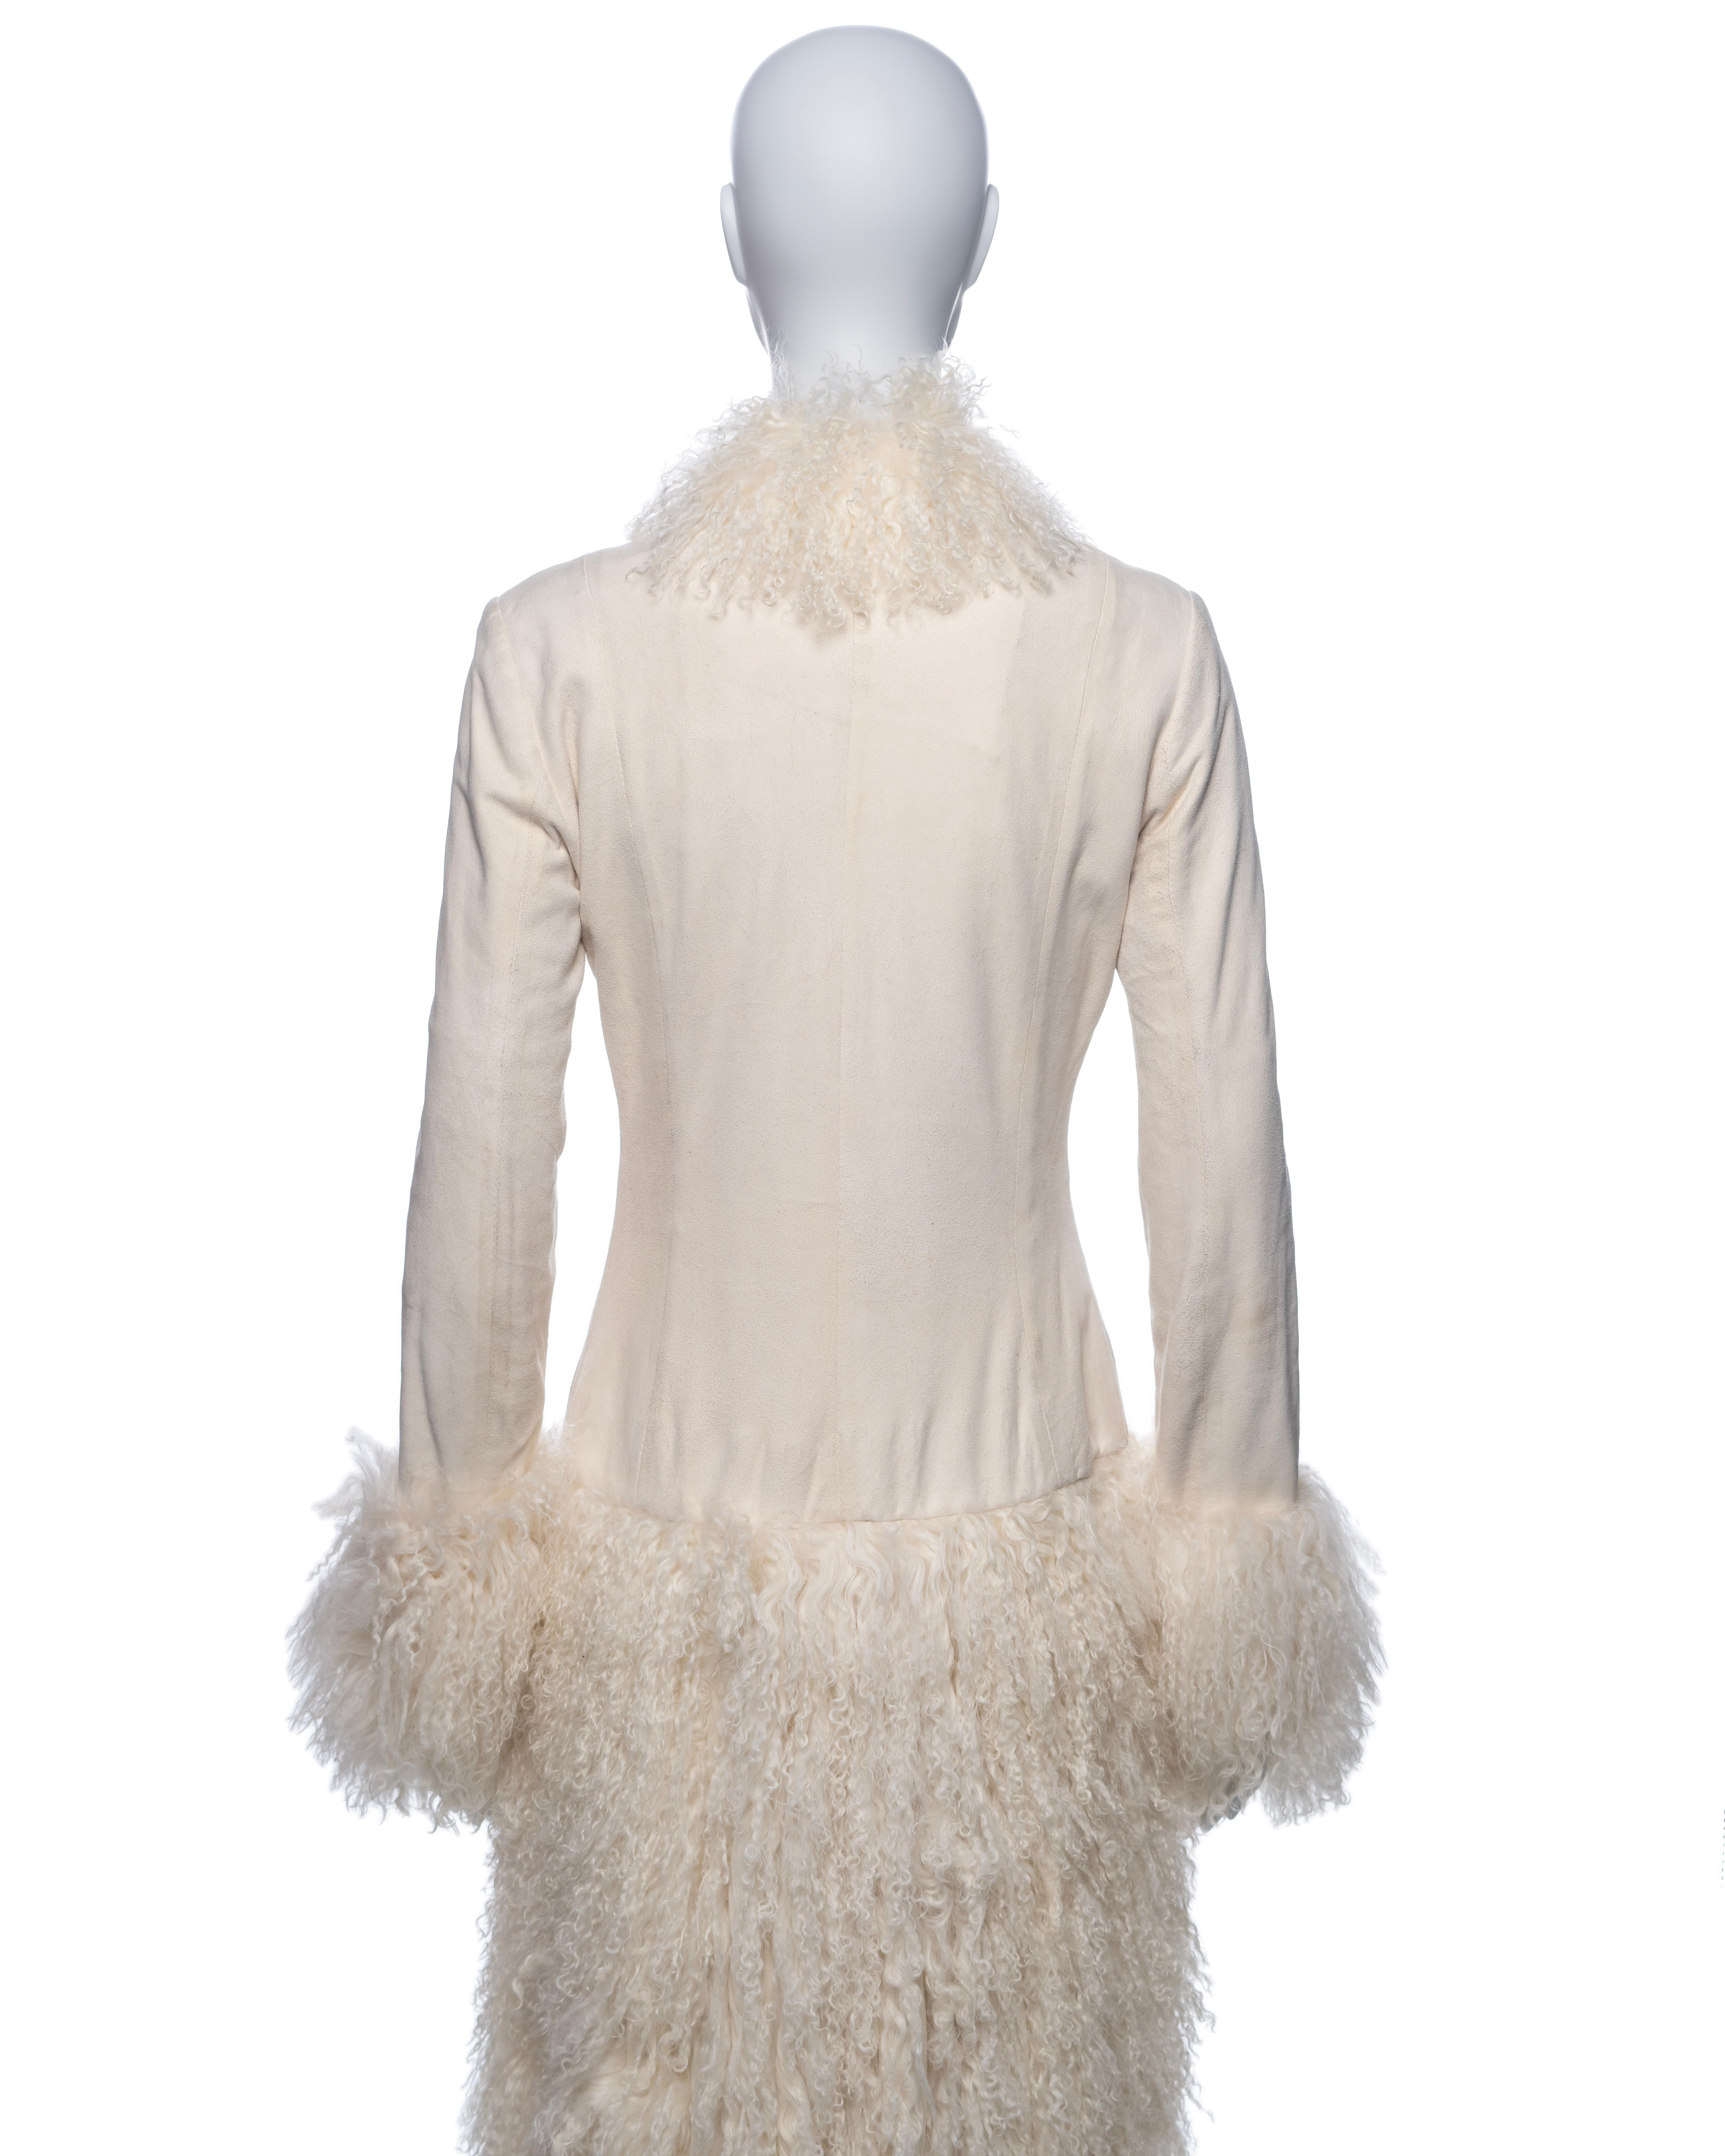 Jean Paul Gaultier White Mongolian Lamb Fur and Leather Coat Dress, FW 2006 For Sale 9